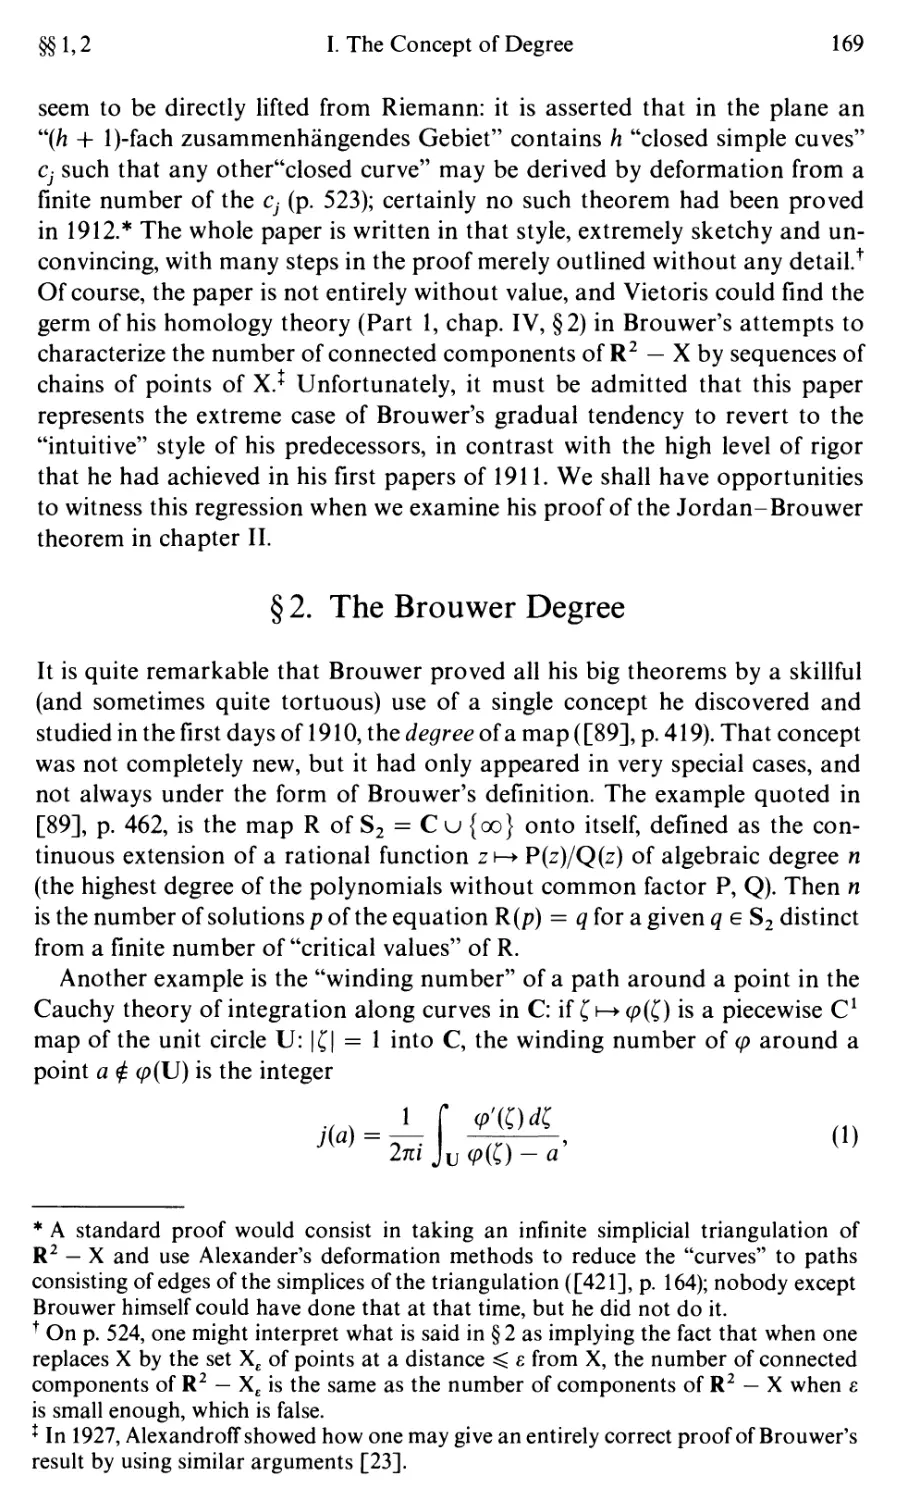 §2. The Brouwer Degree